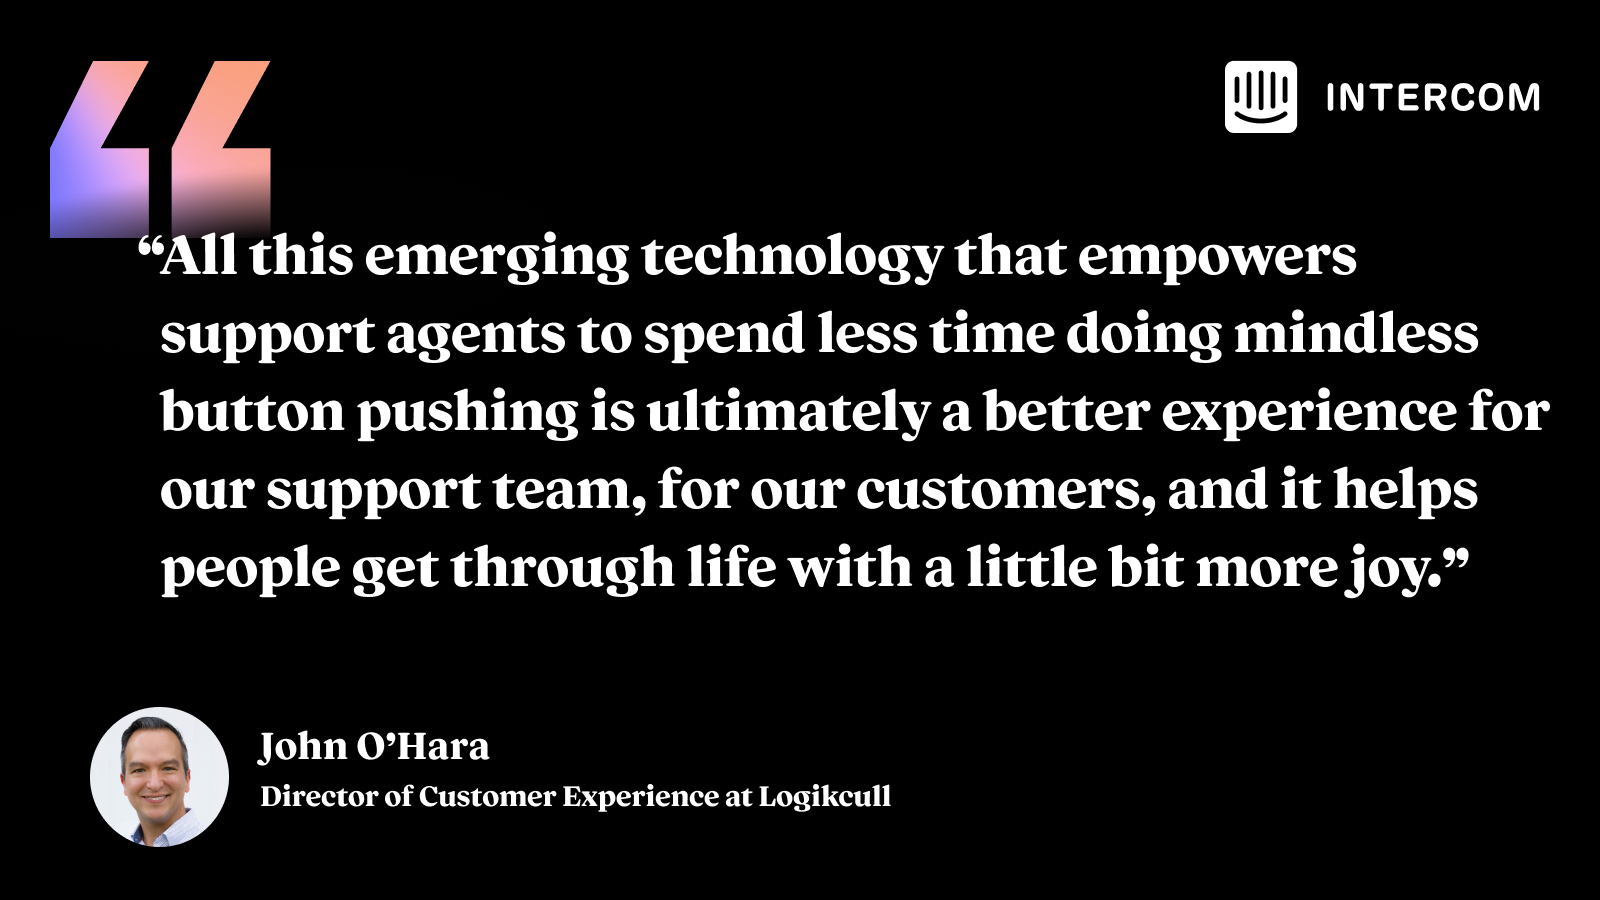 “All this emerging technology that empowers support agents to spend less time doing mindless button pushing is ultimately a better experience for our support team, for our customers, and it helps people get through life with a little bit more joy.” John O'Hara, Director of Customer Experience at Logikcull.